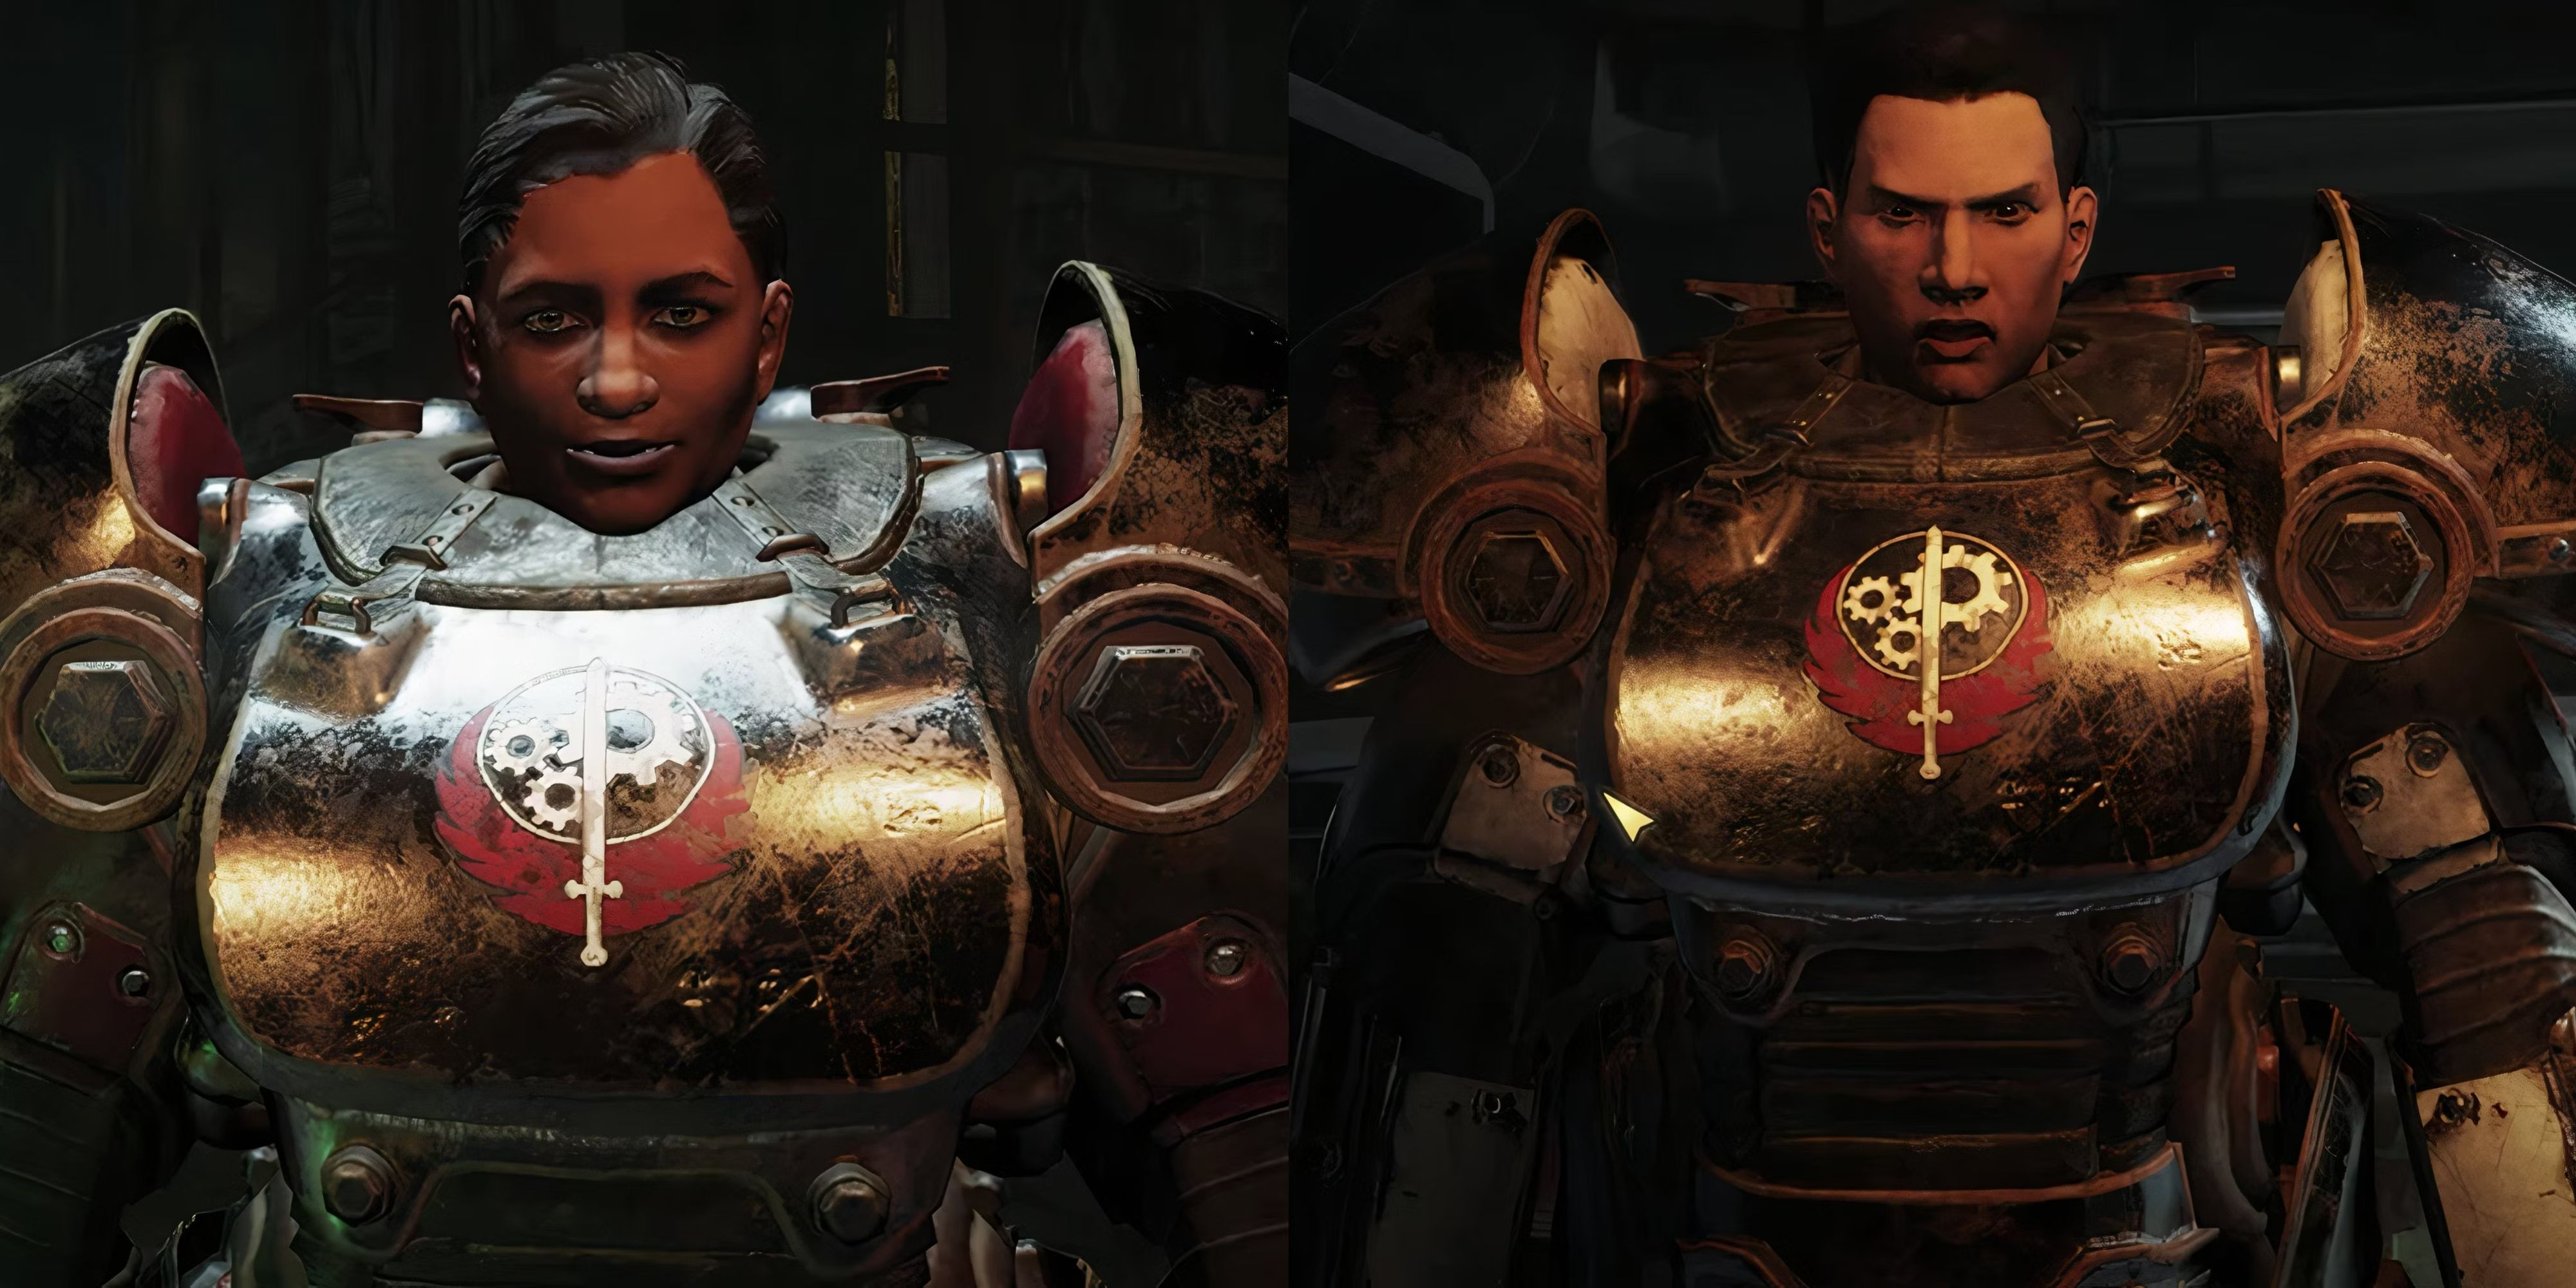 Should You Side With Paladin Rahmani or Shin in Fallout 76